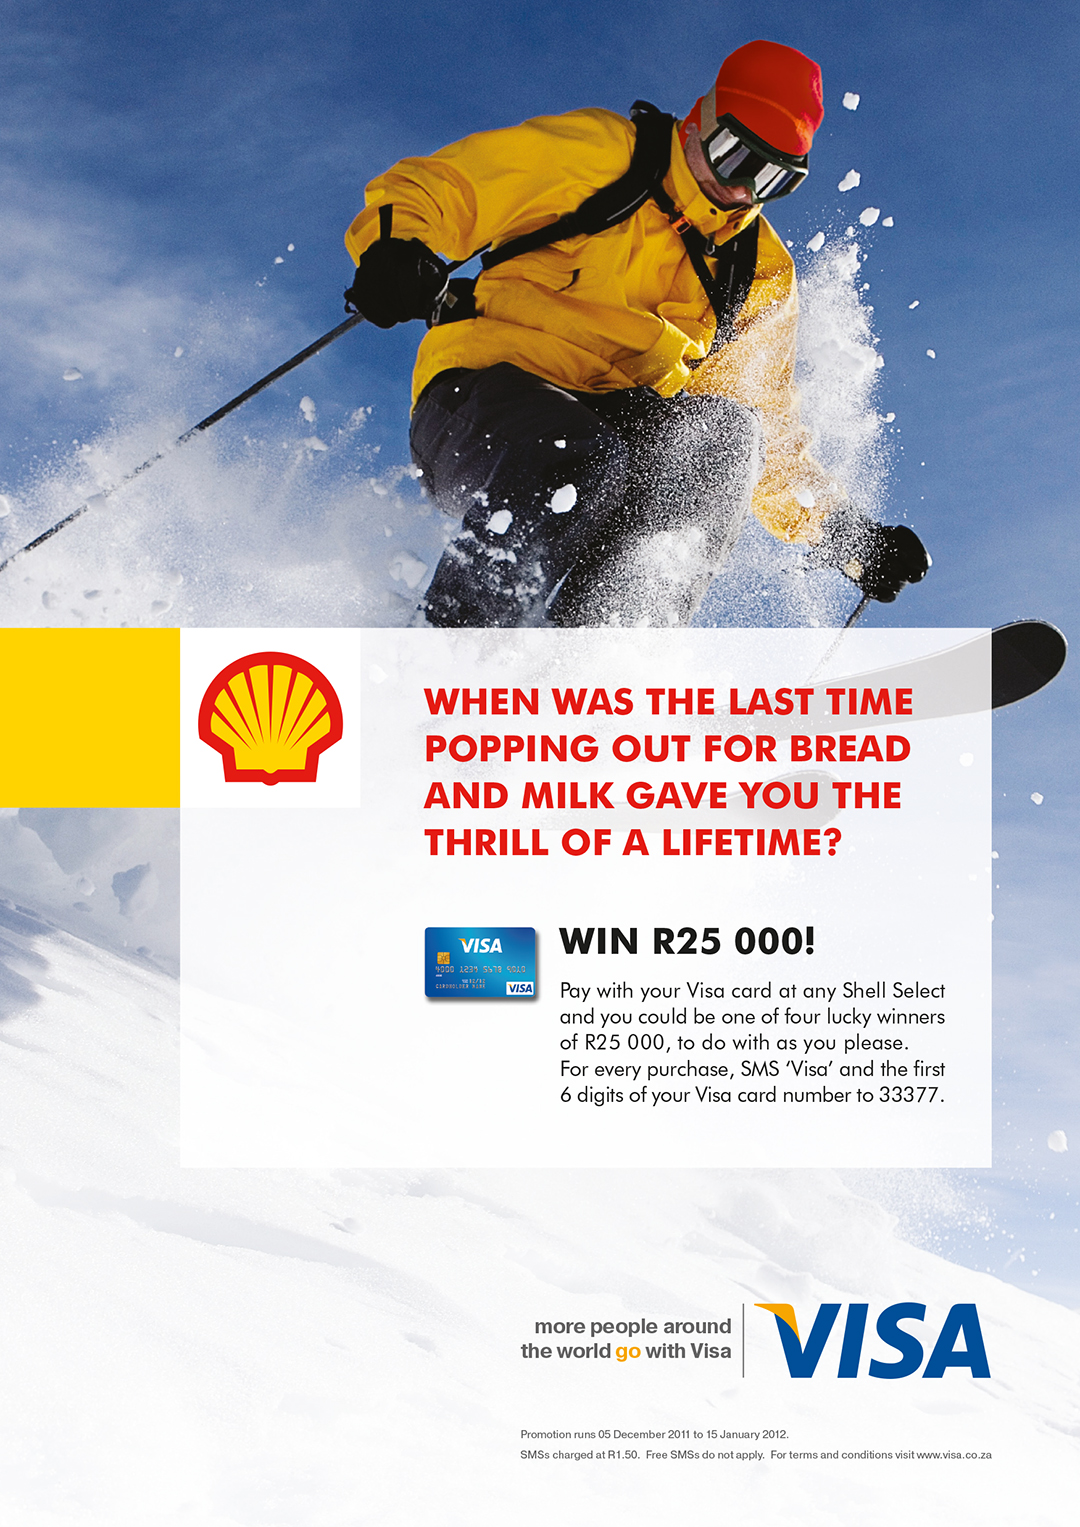 Visa Shell promotion: marketing collateral design showing man skiing